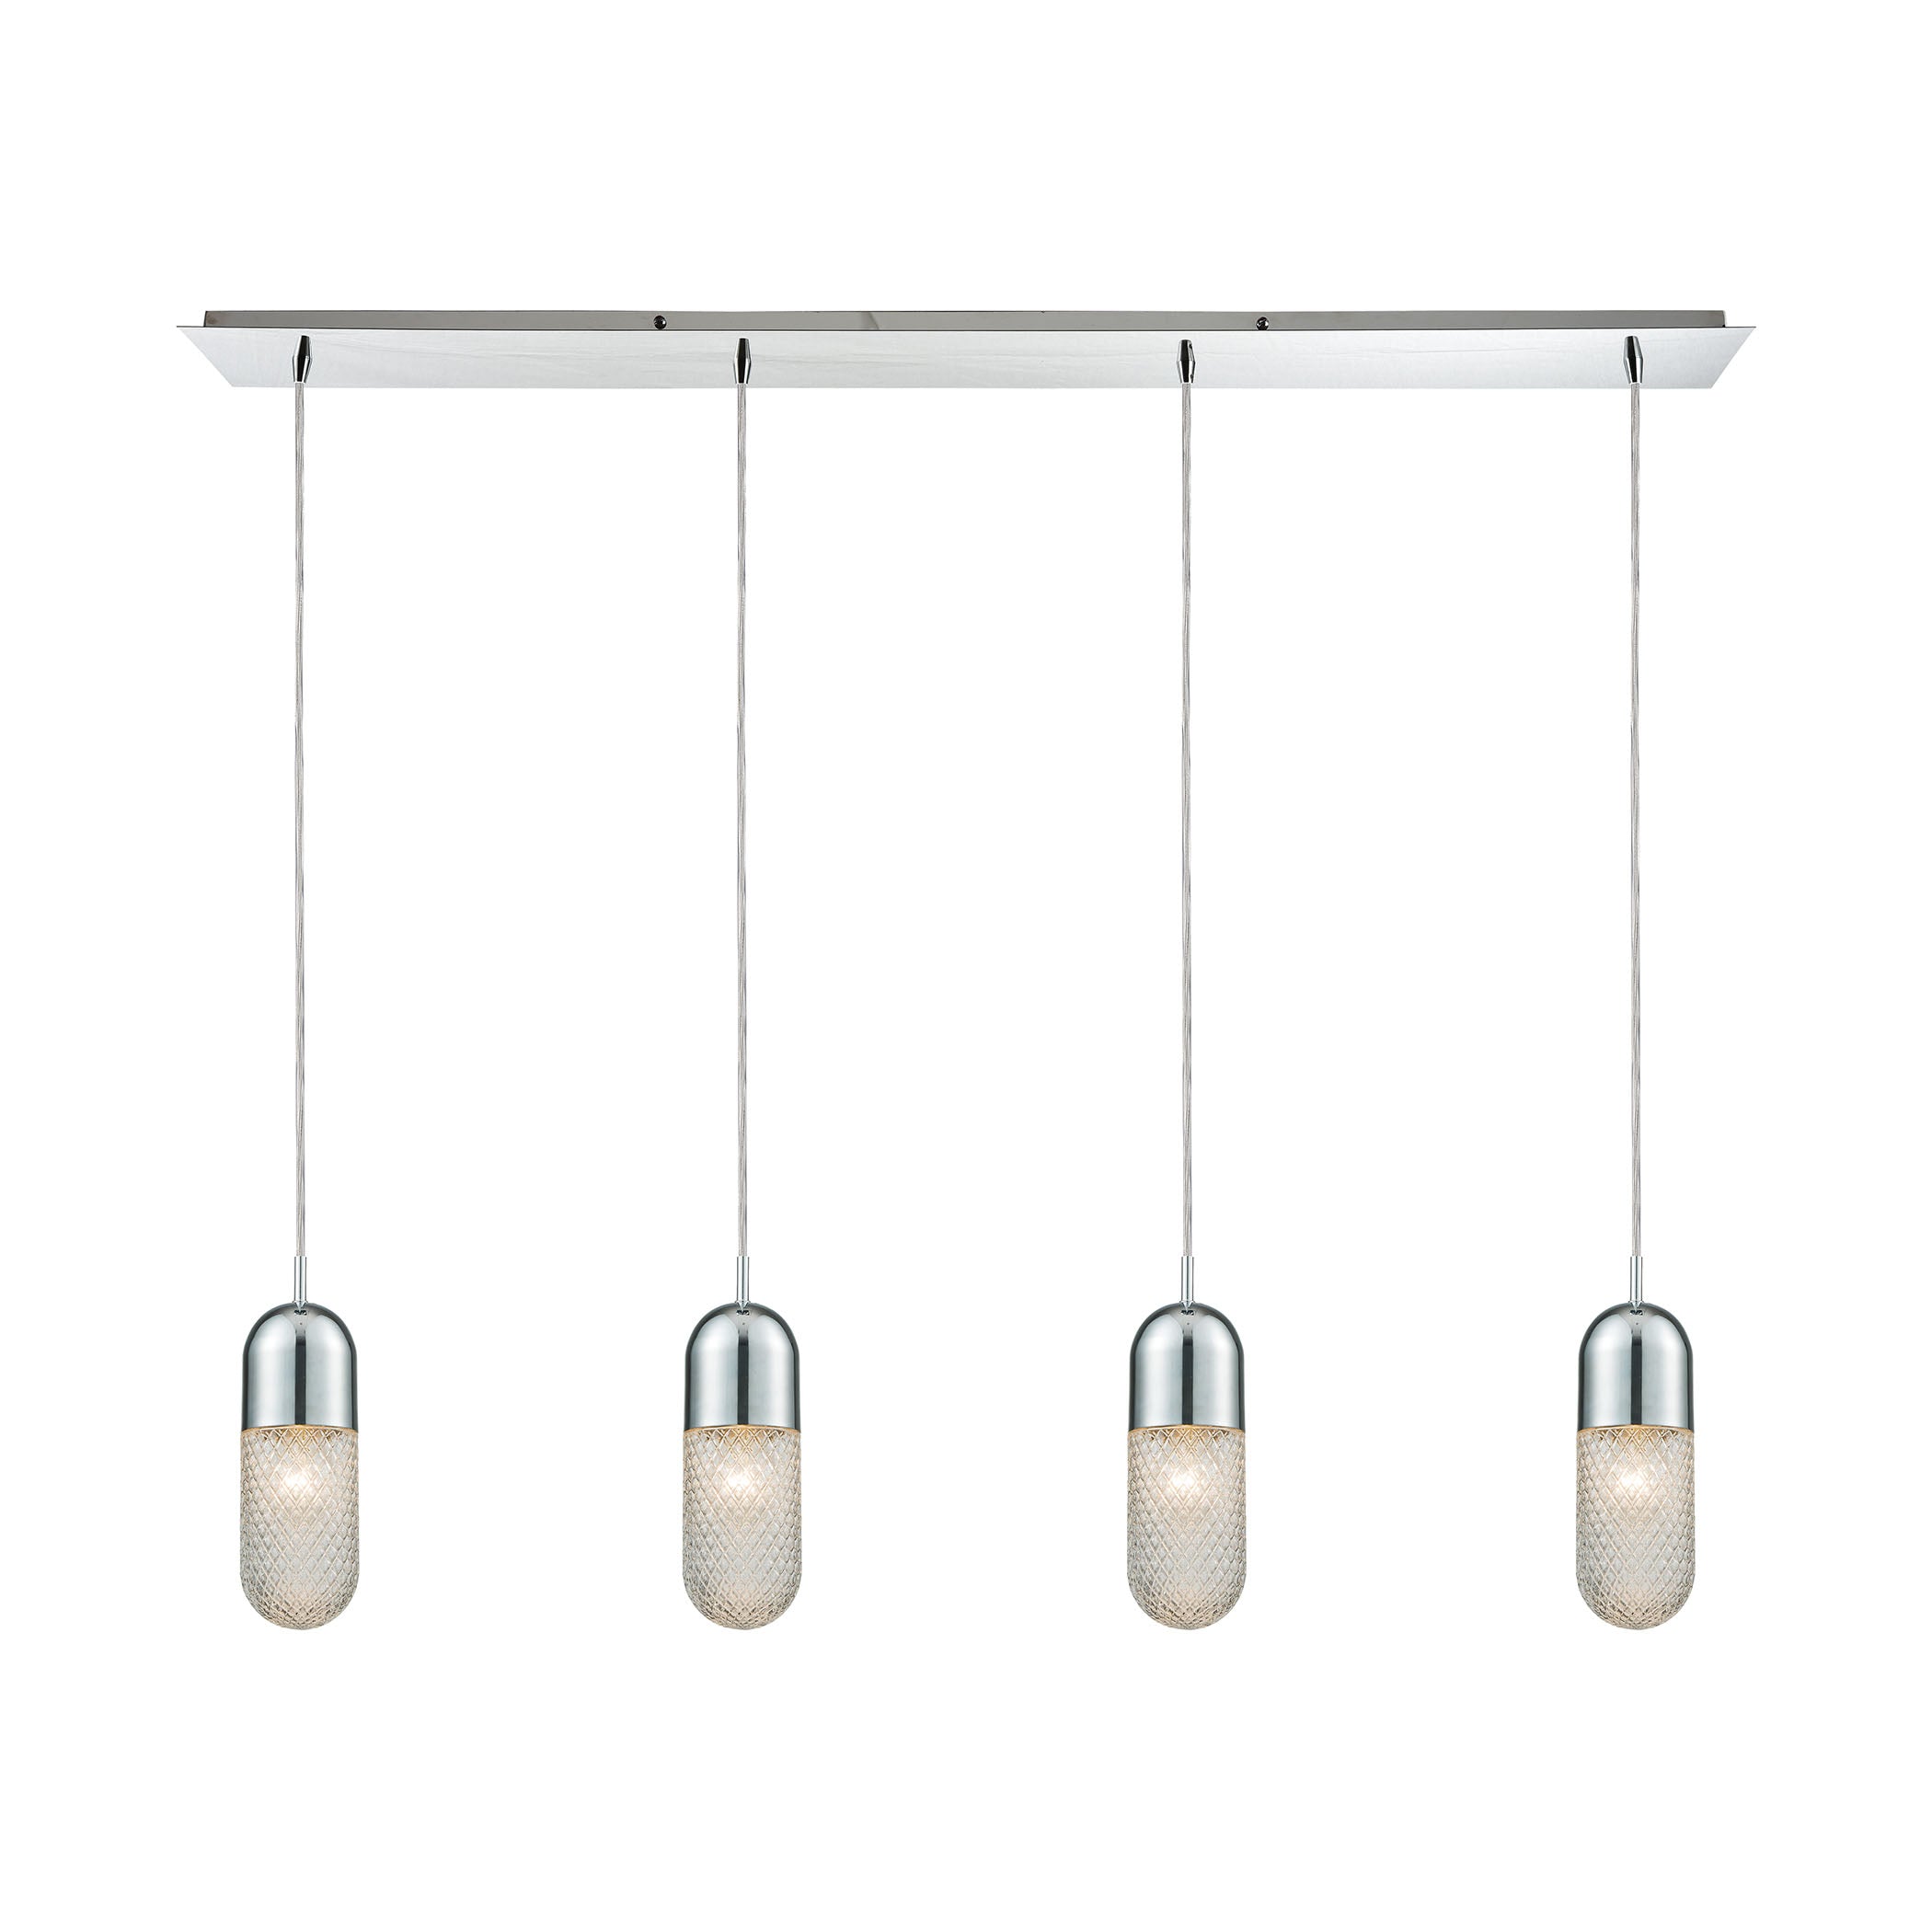 ELK Lighting 56661/4LP Capsula 4-Light Linear Pendant Fixture in Polished Chrome with Clear Textured Glass